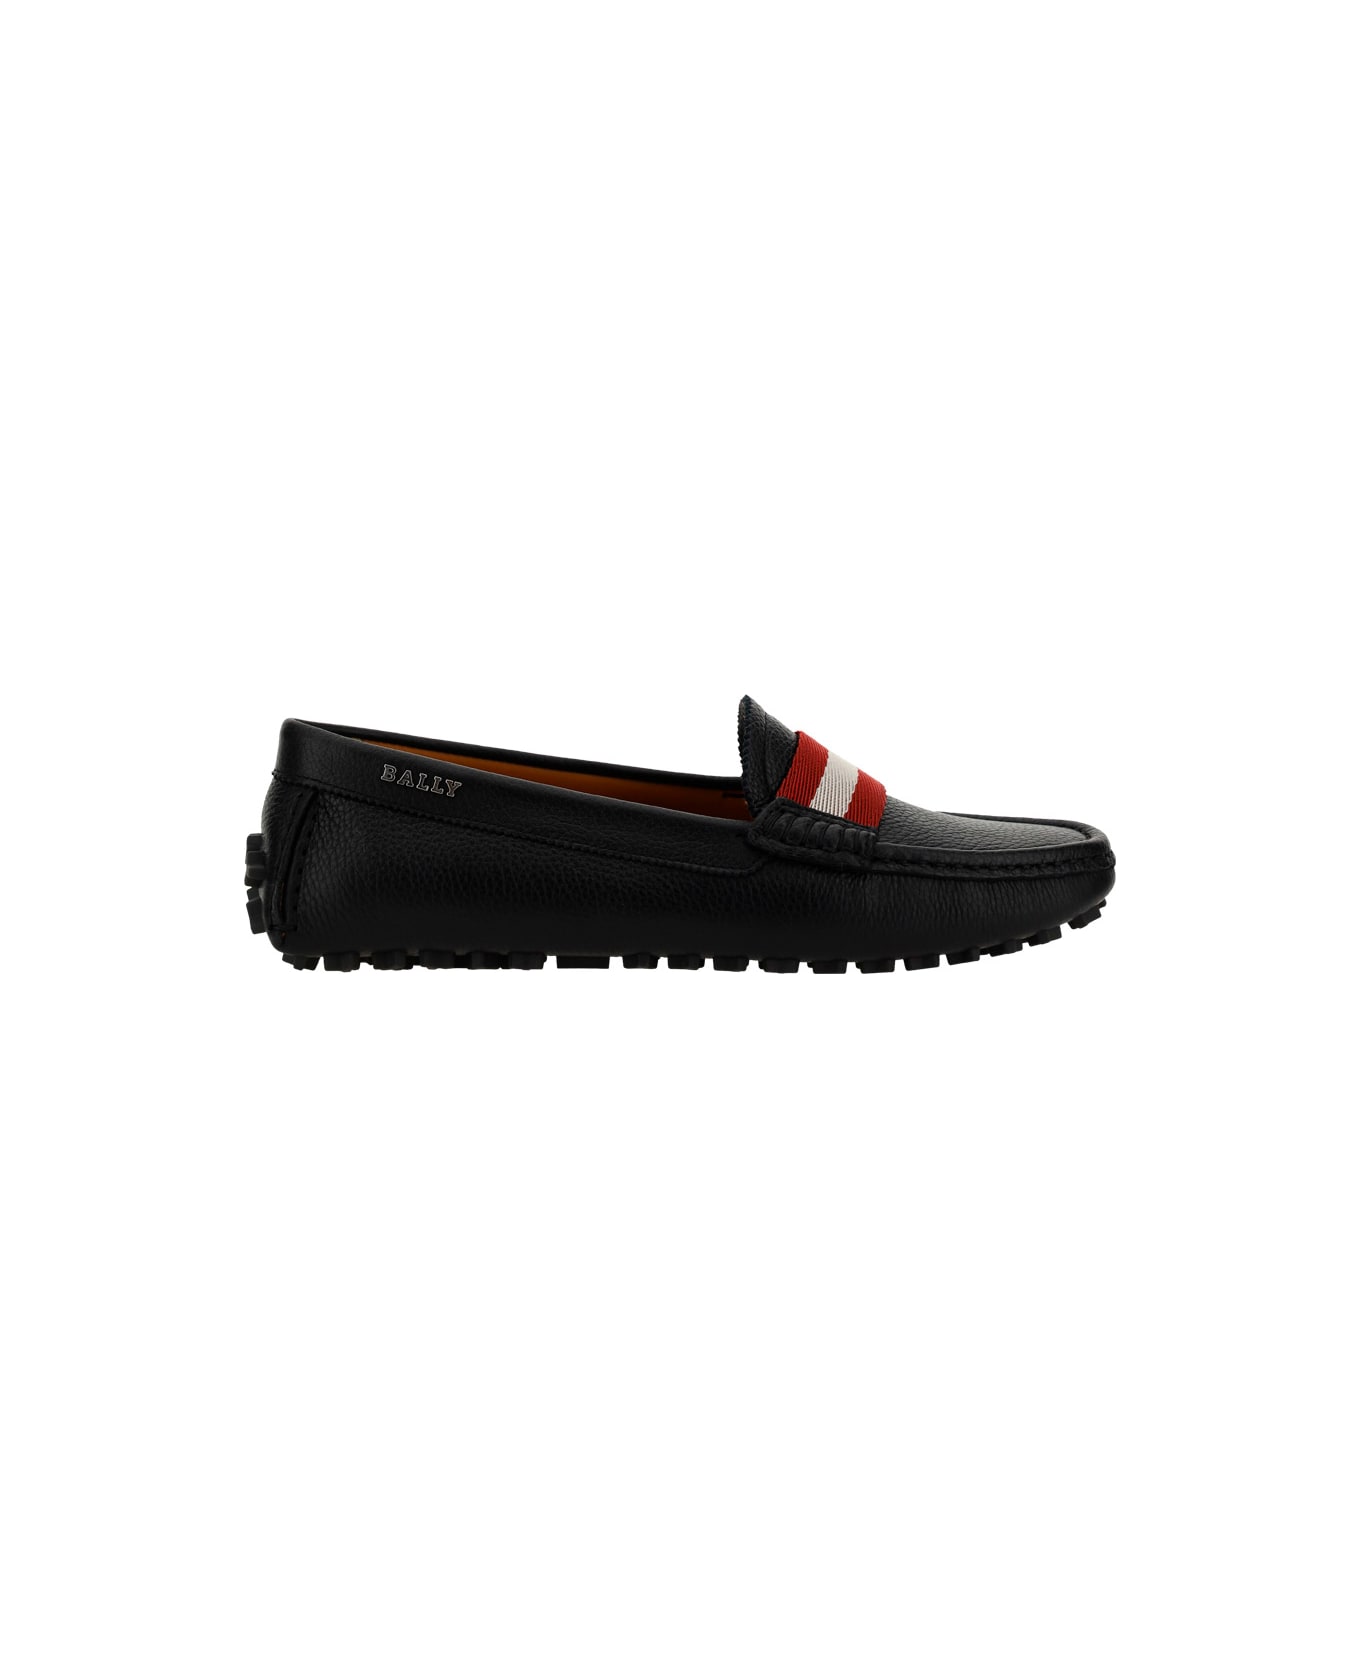 Bally Ladyes Loafers - Black